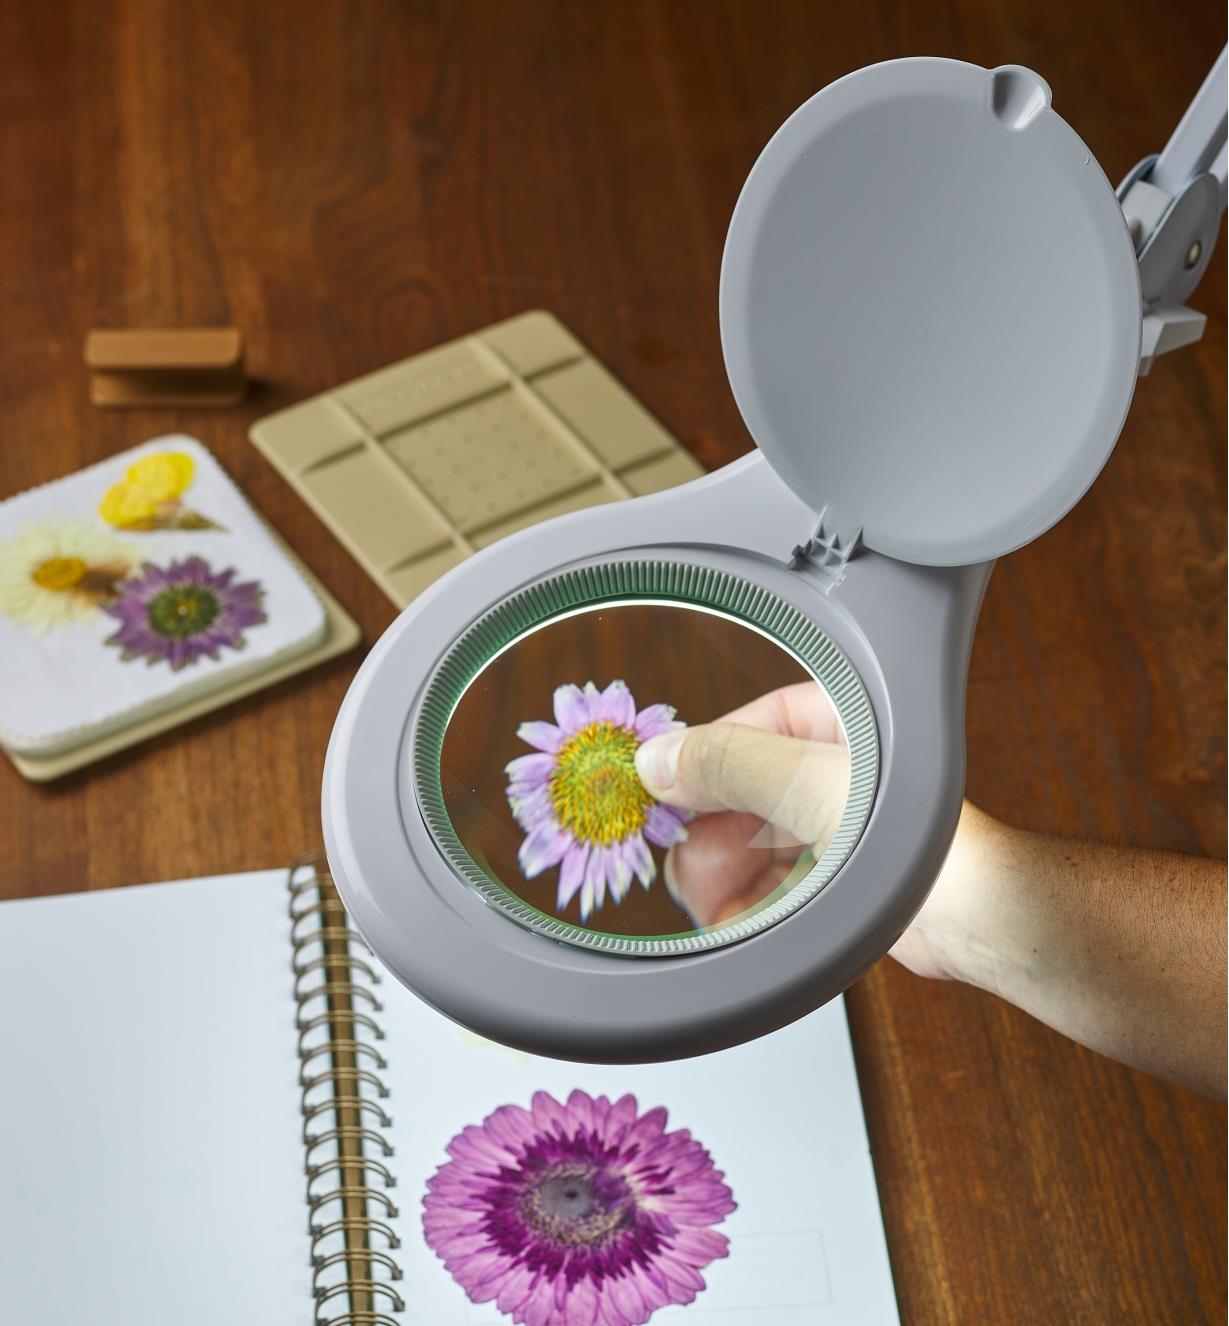 A flower being held under the LED Magnifying Bench Lamp, with art supplies on a table.